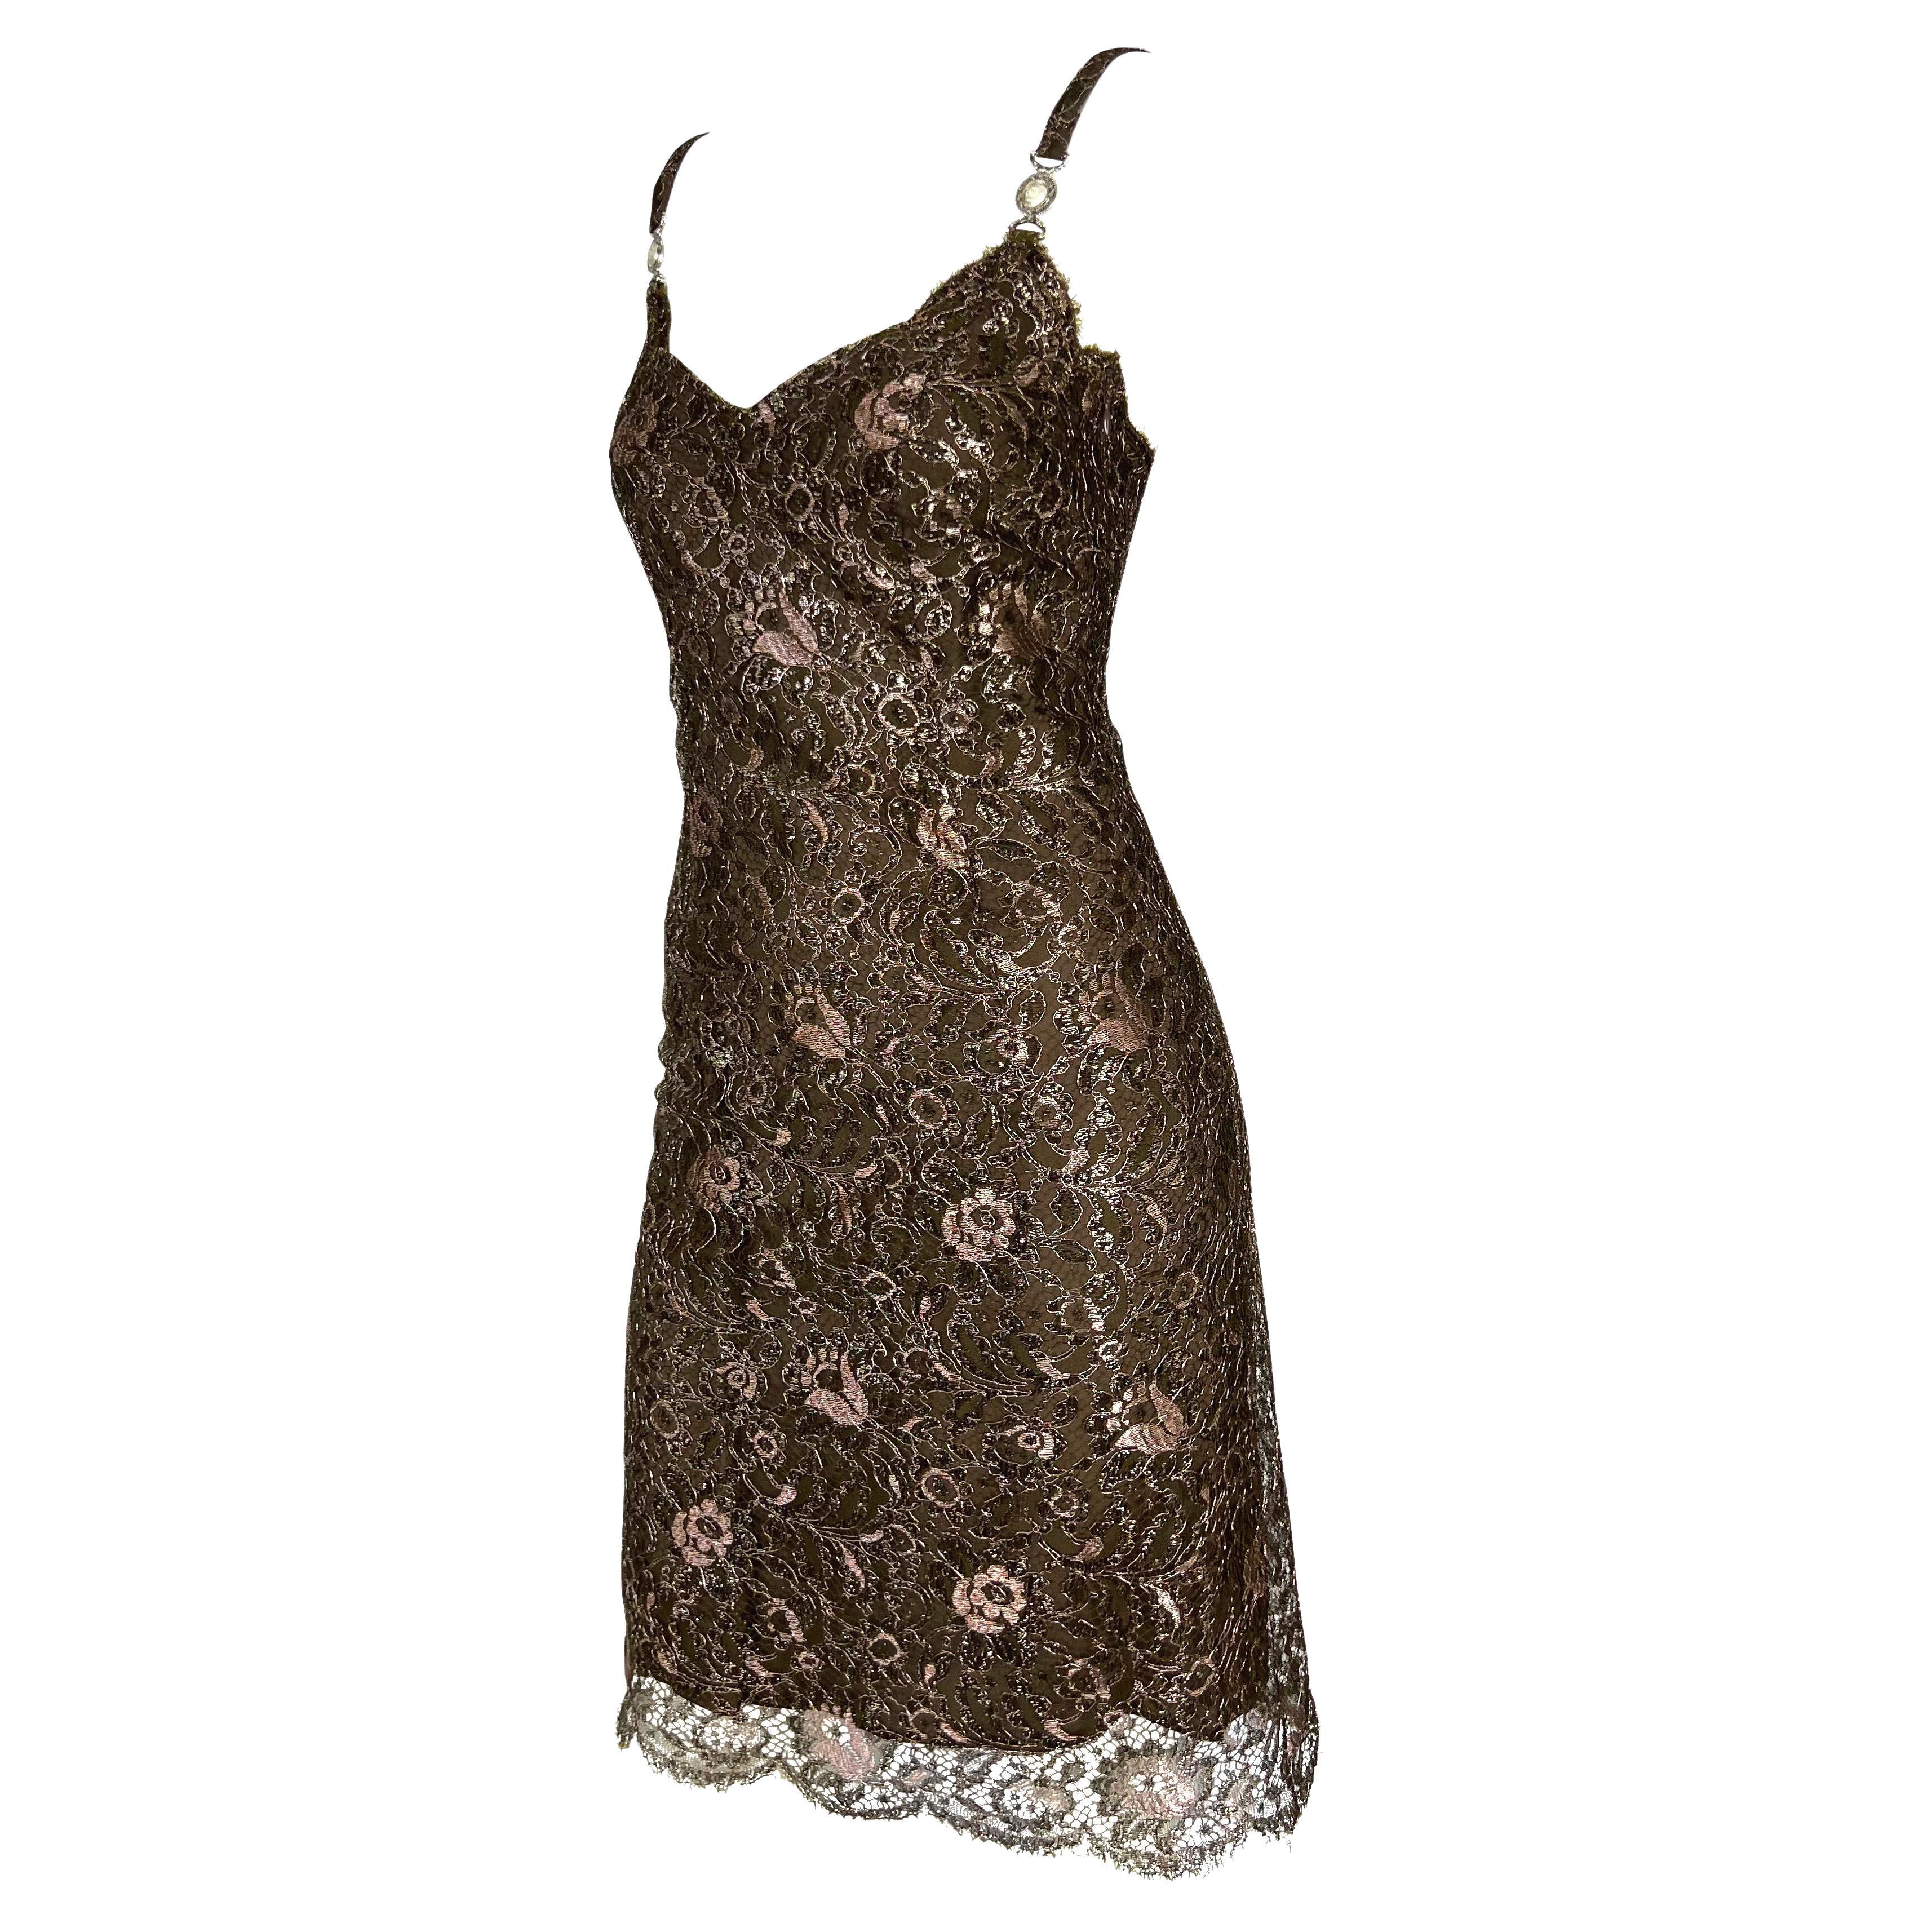 F/W 1996 Gianni Versace Couture Metallic Brown Floral Lace Medusa Mini Dress For Sale